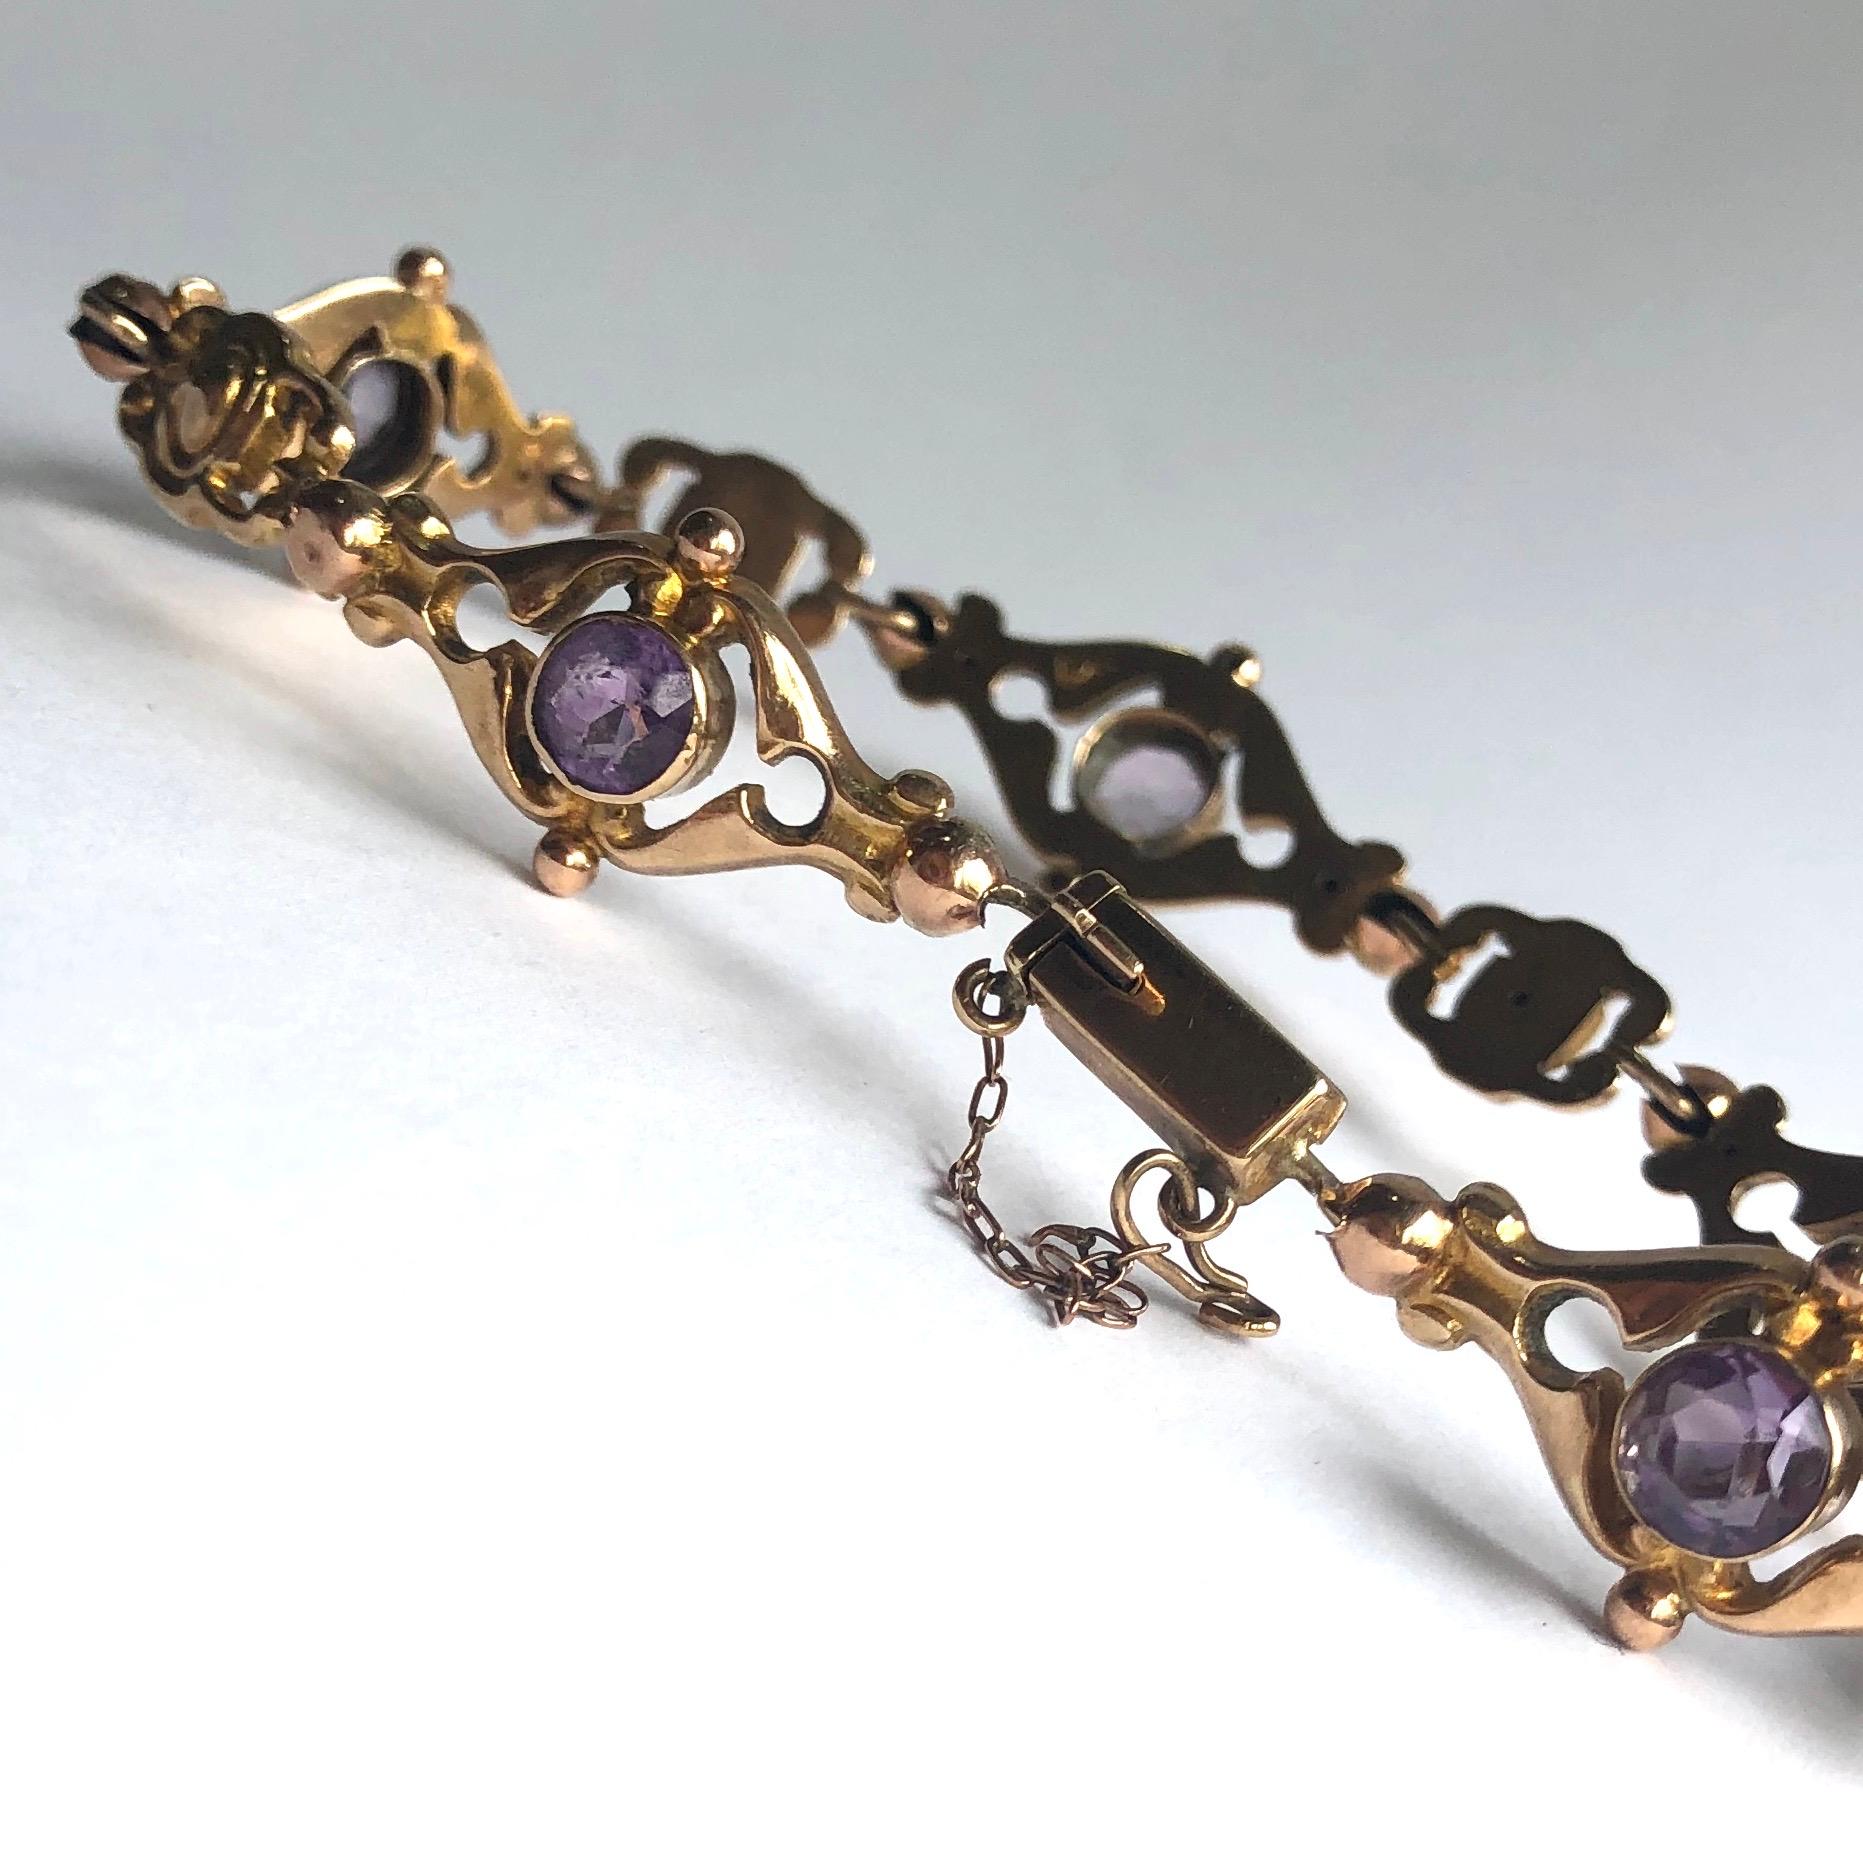 The links in this bracelet are decorative and beautiful. Five of the links hold an amethyst measuring 75pts and are modelled in 9ct gold. 

Length: 20cm
Bracelet Width: 14mm 

Weight: 9.4g